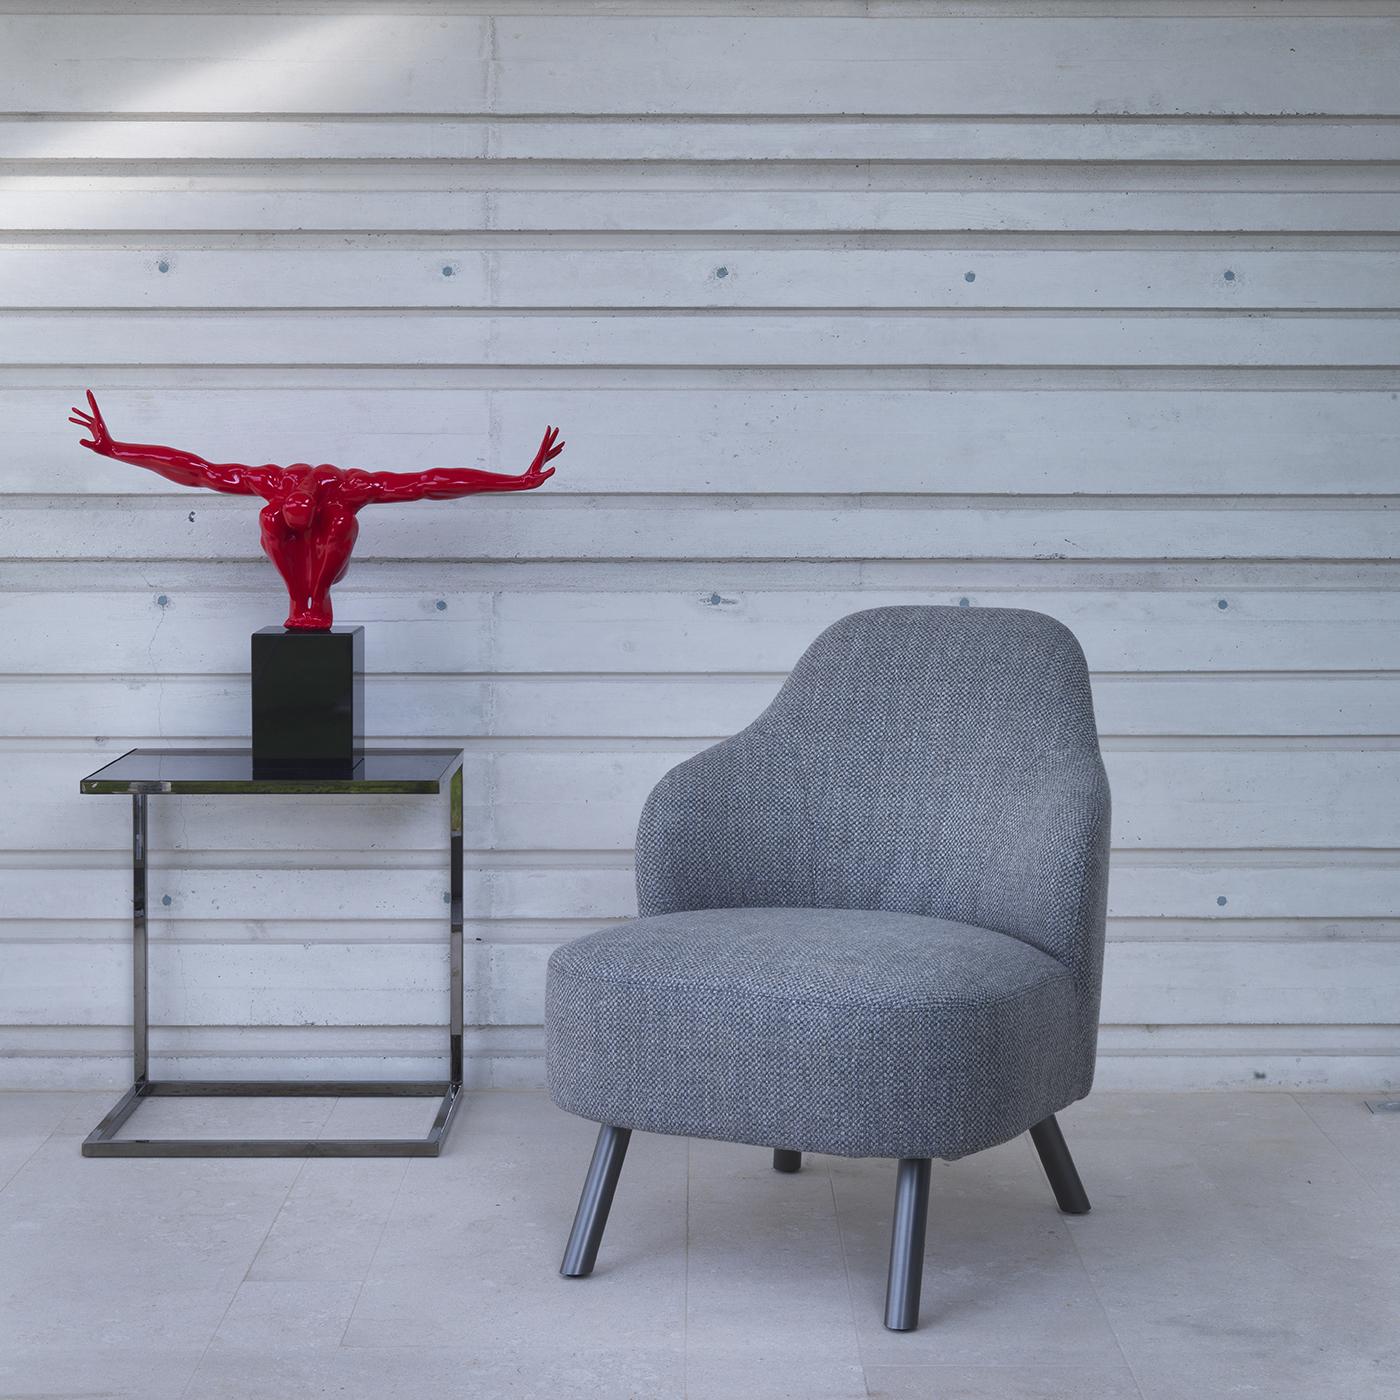 This chair features soft, sinuous lines and a large wraparound back without armrests. Its seat is covered in rigid polyurethane foam and memory foam, while its plywood back sports rigid polyurethane foam and protective fabric, which is not